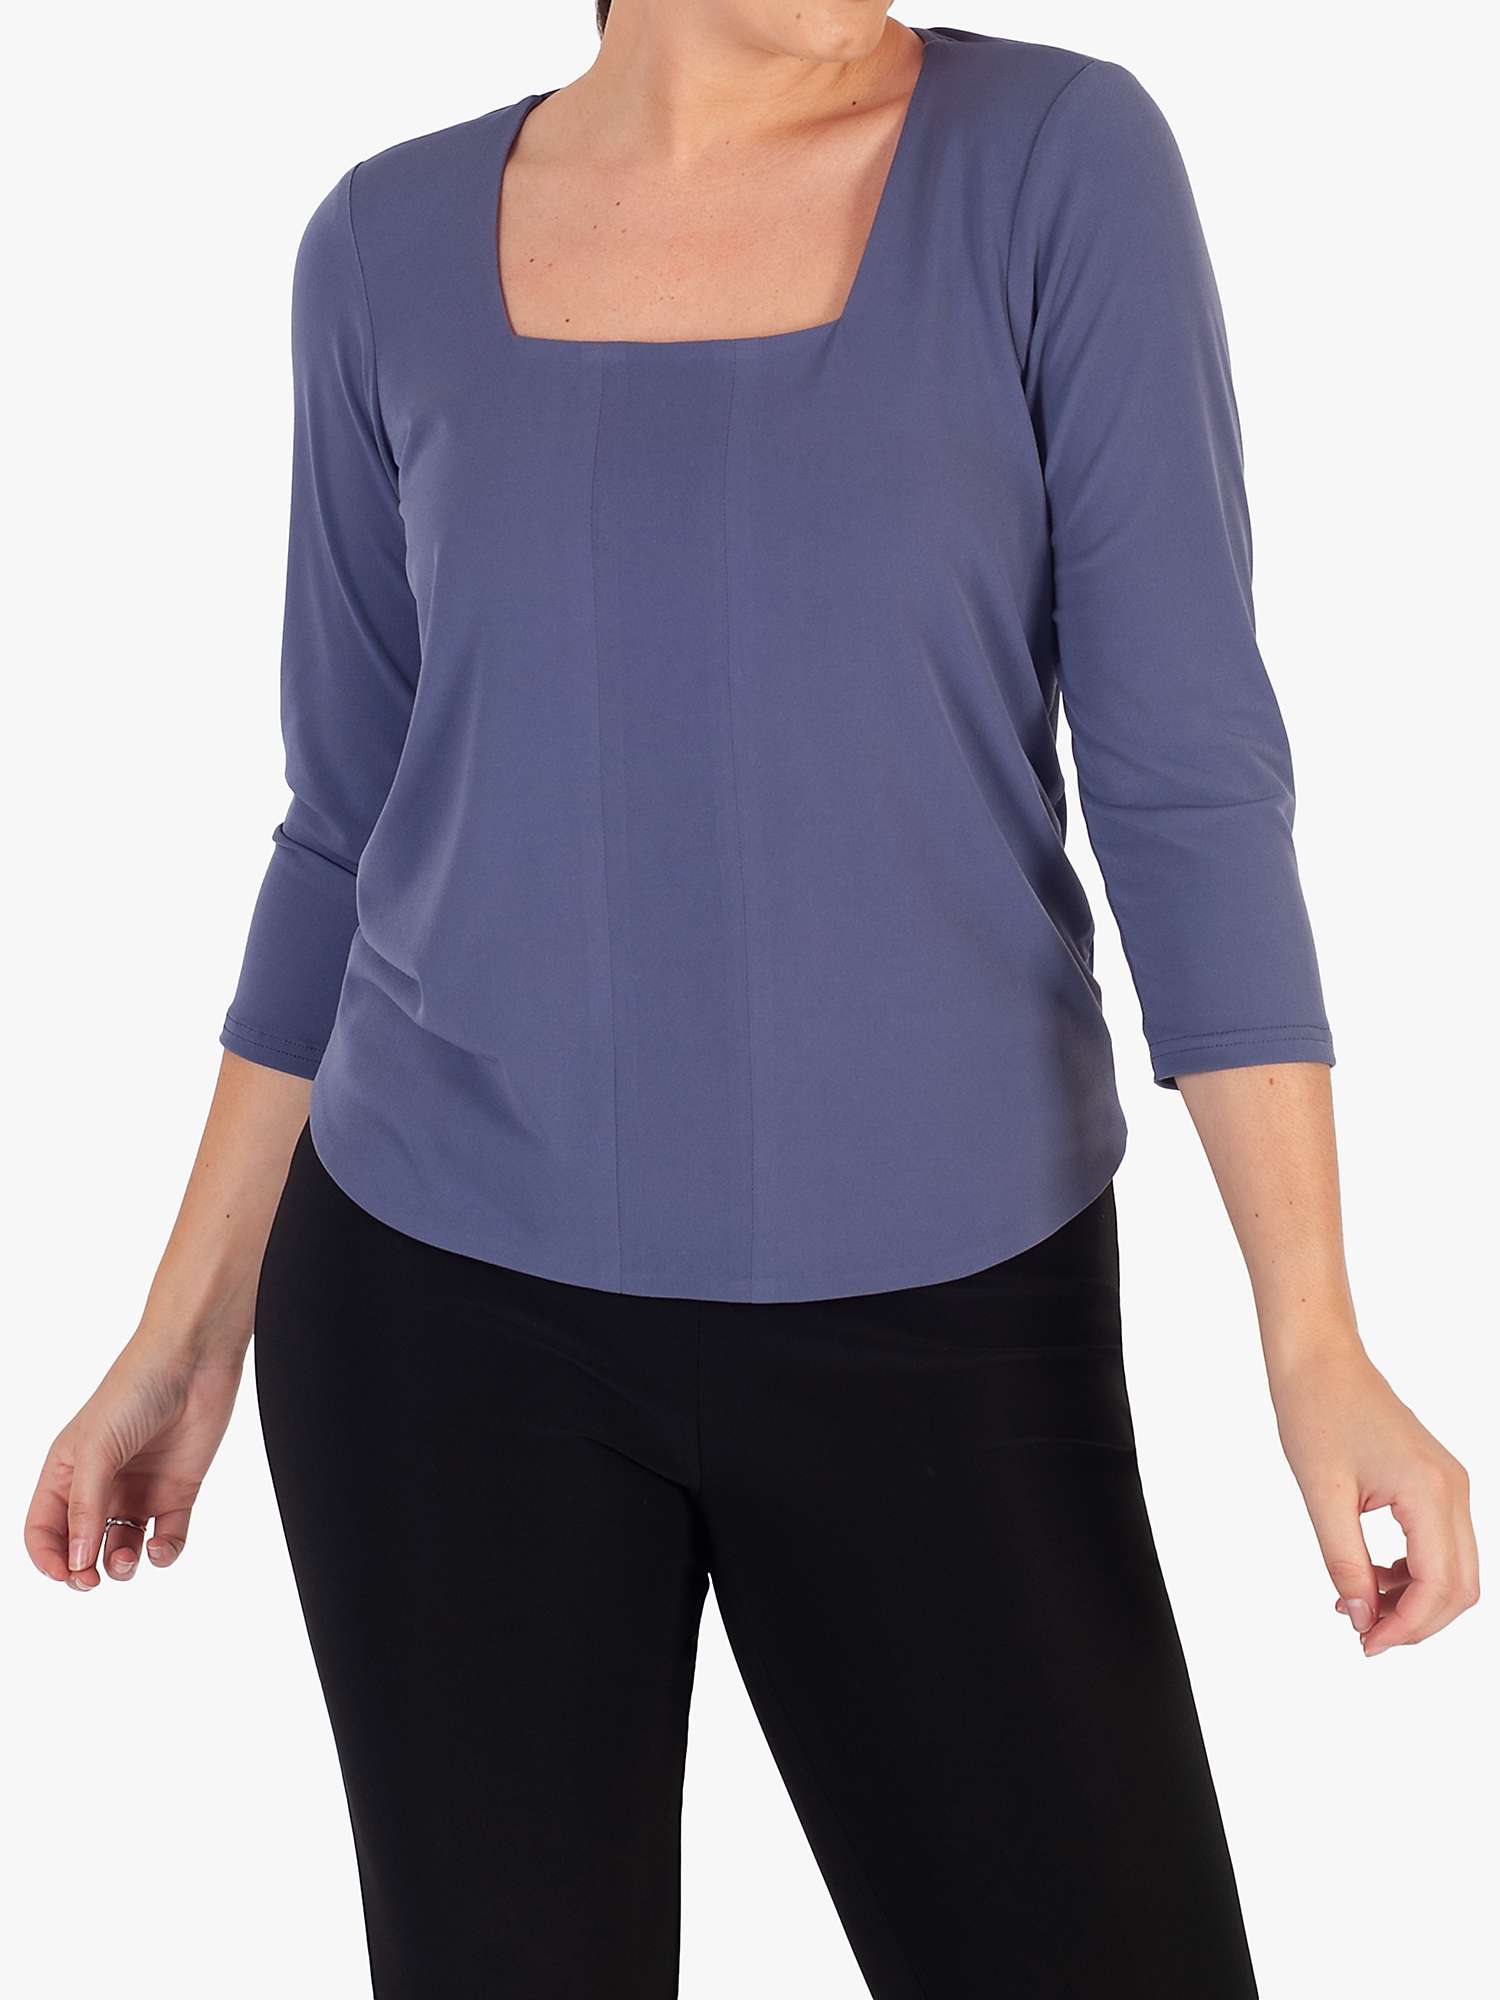 Buy chesca Square Neck Long Sleeve Top Online at johnlewis.com